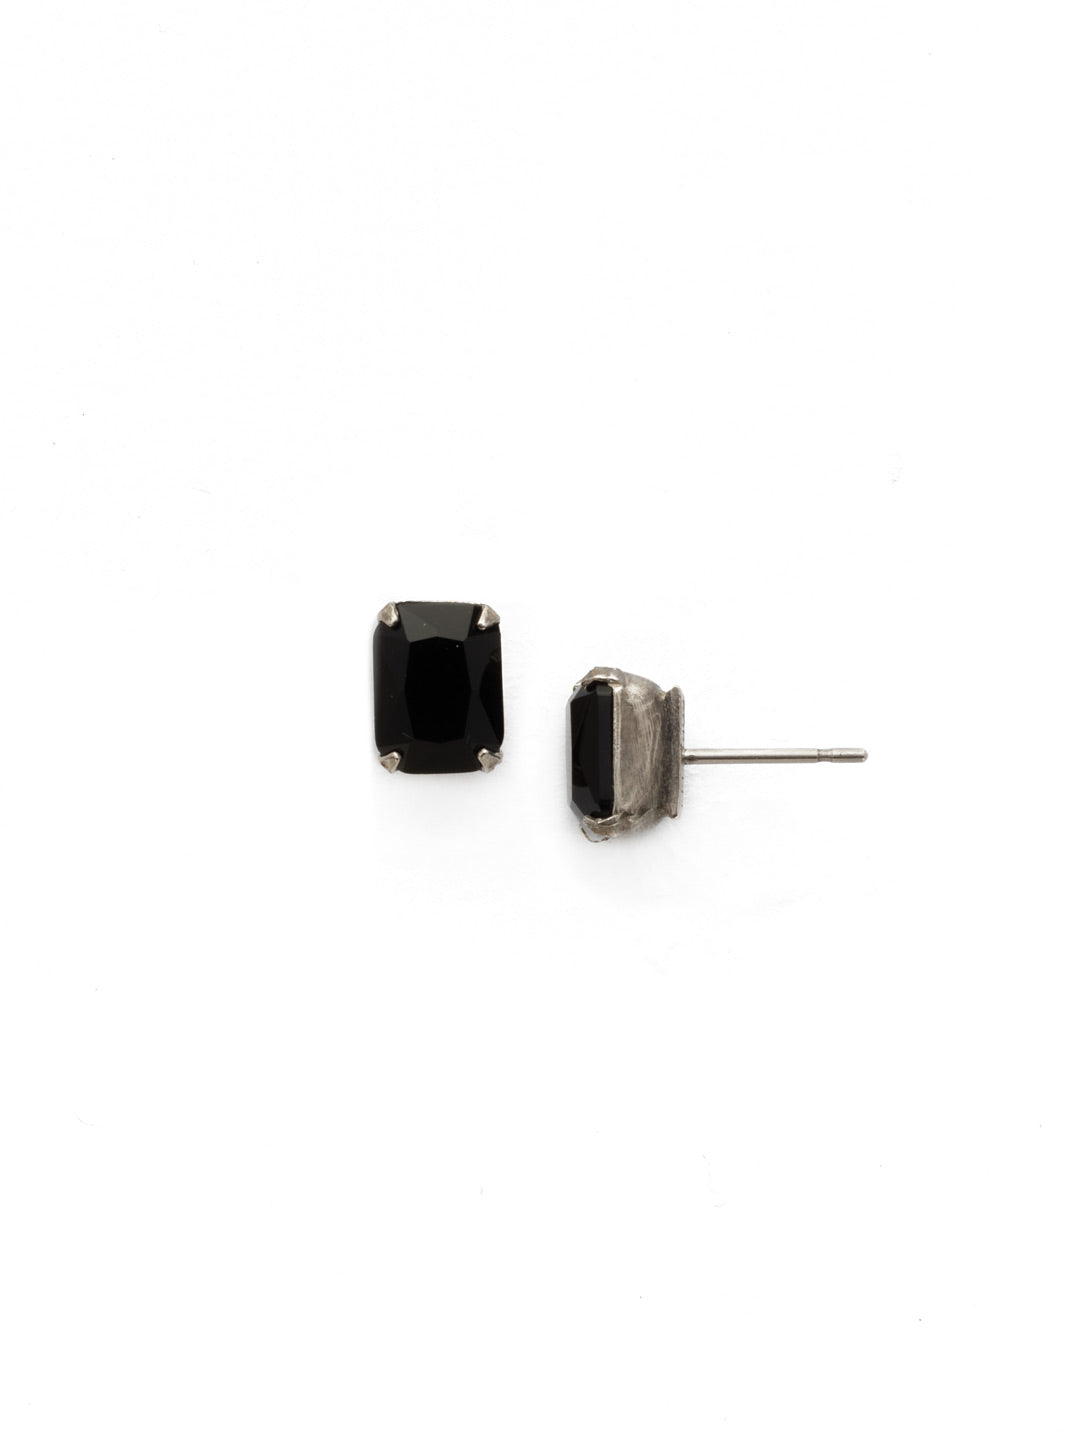 Mini Emerald Cut Stud Earrings - EBY42ASBON - <p>Simply sophisticated. The mini emerald cut stud earrings can be worn alone or paired with anything for an extra accent to any wardrobe. From Sorrelli's Black Onyx collection in our Antique Silver-tone finish.</p>